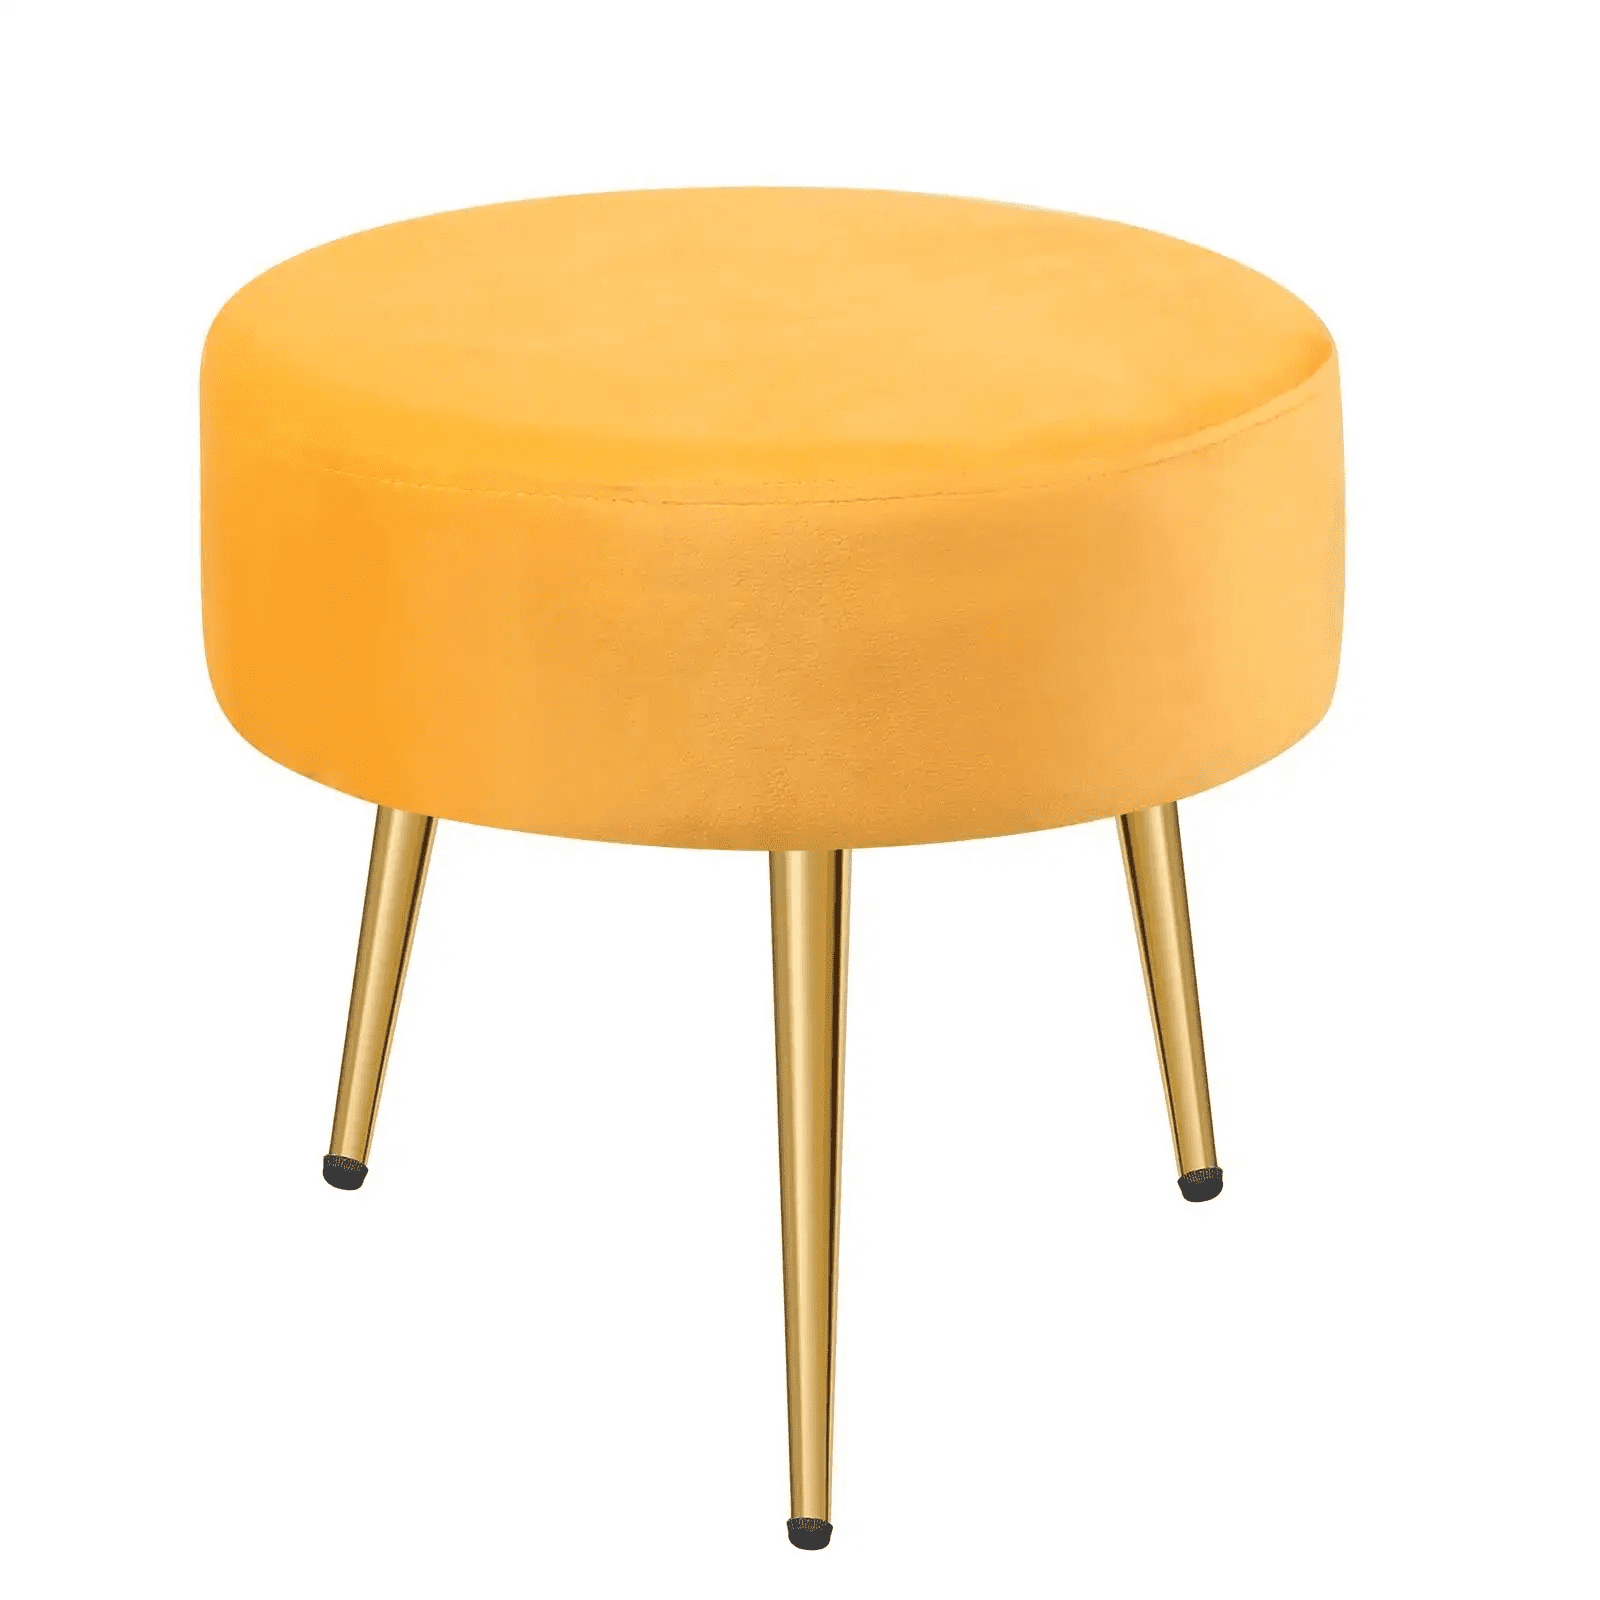 Modern Yellow Velvet Upholstered Square 18.1 in. Tufted Button Exquisite Ottoman Soft Foot Stool Dressing Makeup Chair